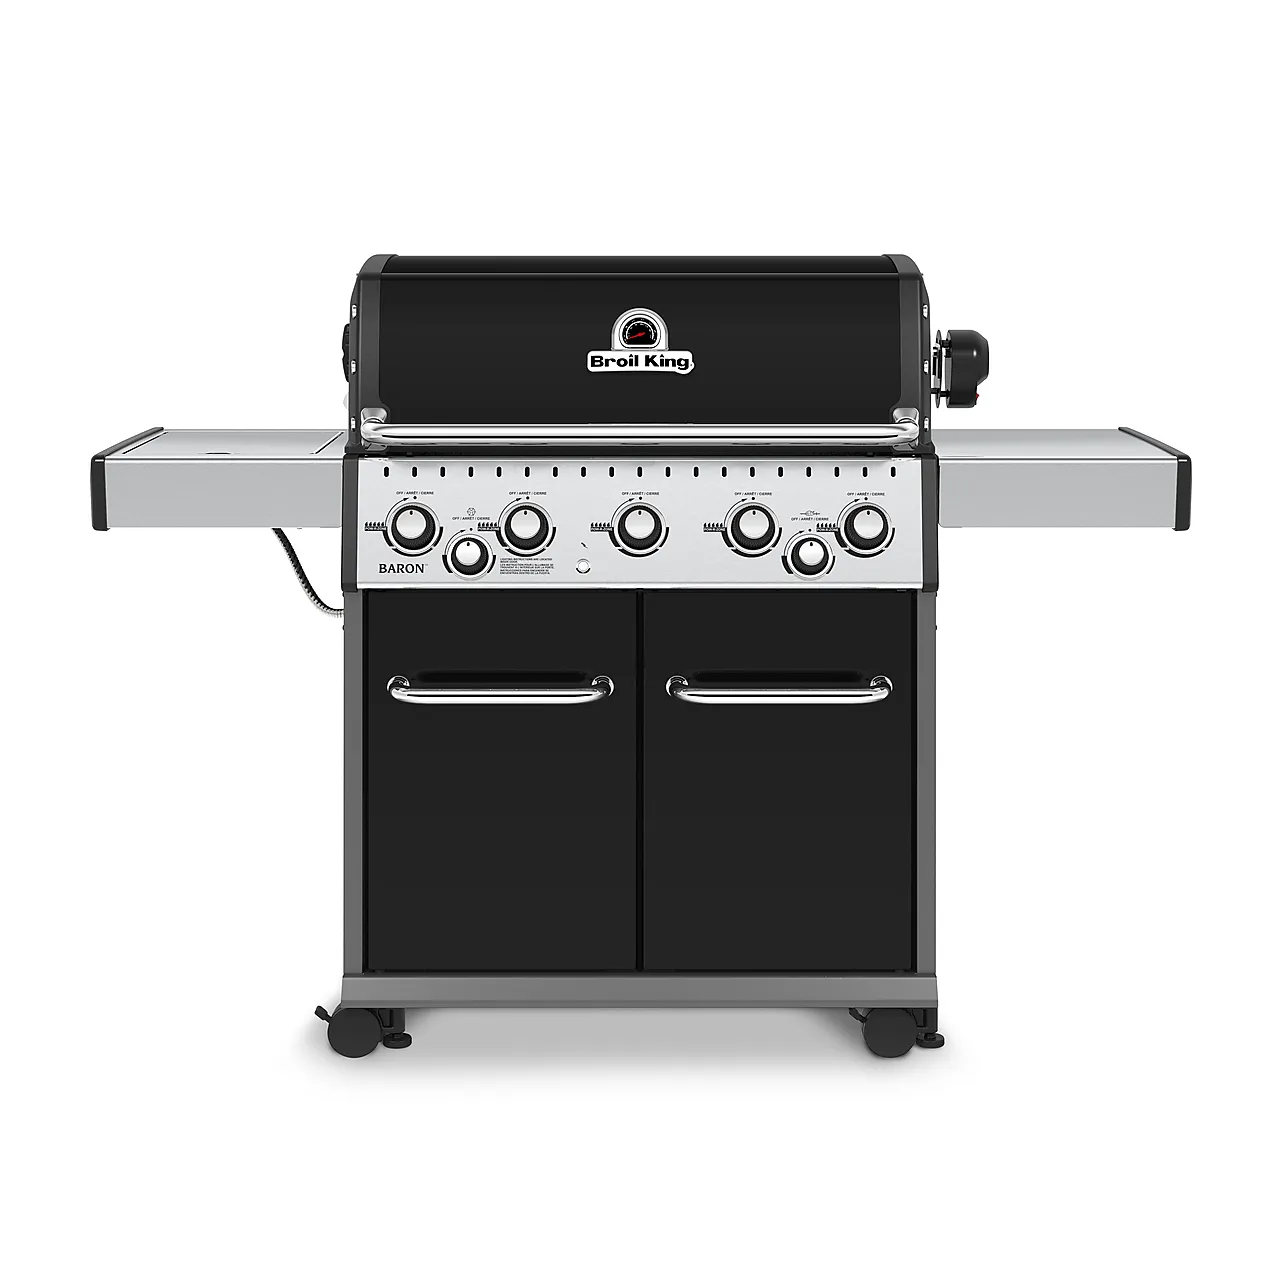 Gassgrill baron 590 null - null - 1